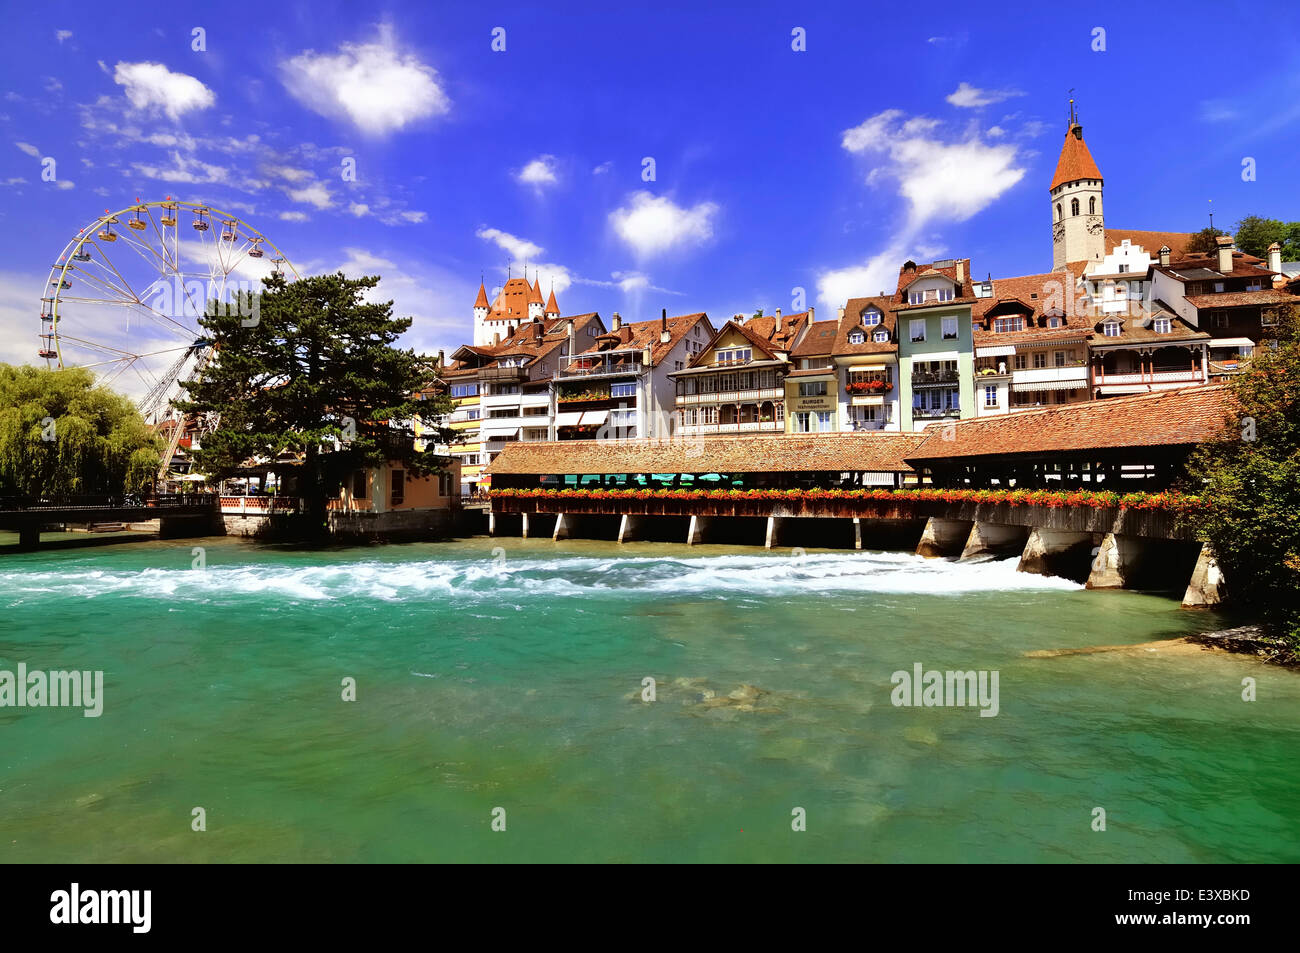 Historic centre of Thun with a Ferris wheel, lower lock of the Aare River, Thun, Canton of Bern, Switzerland Stock Photo